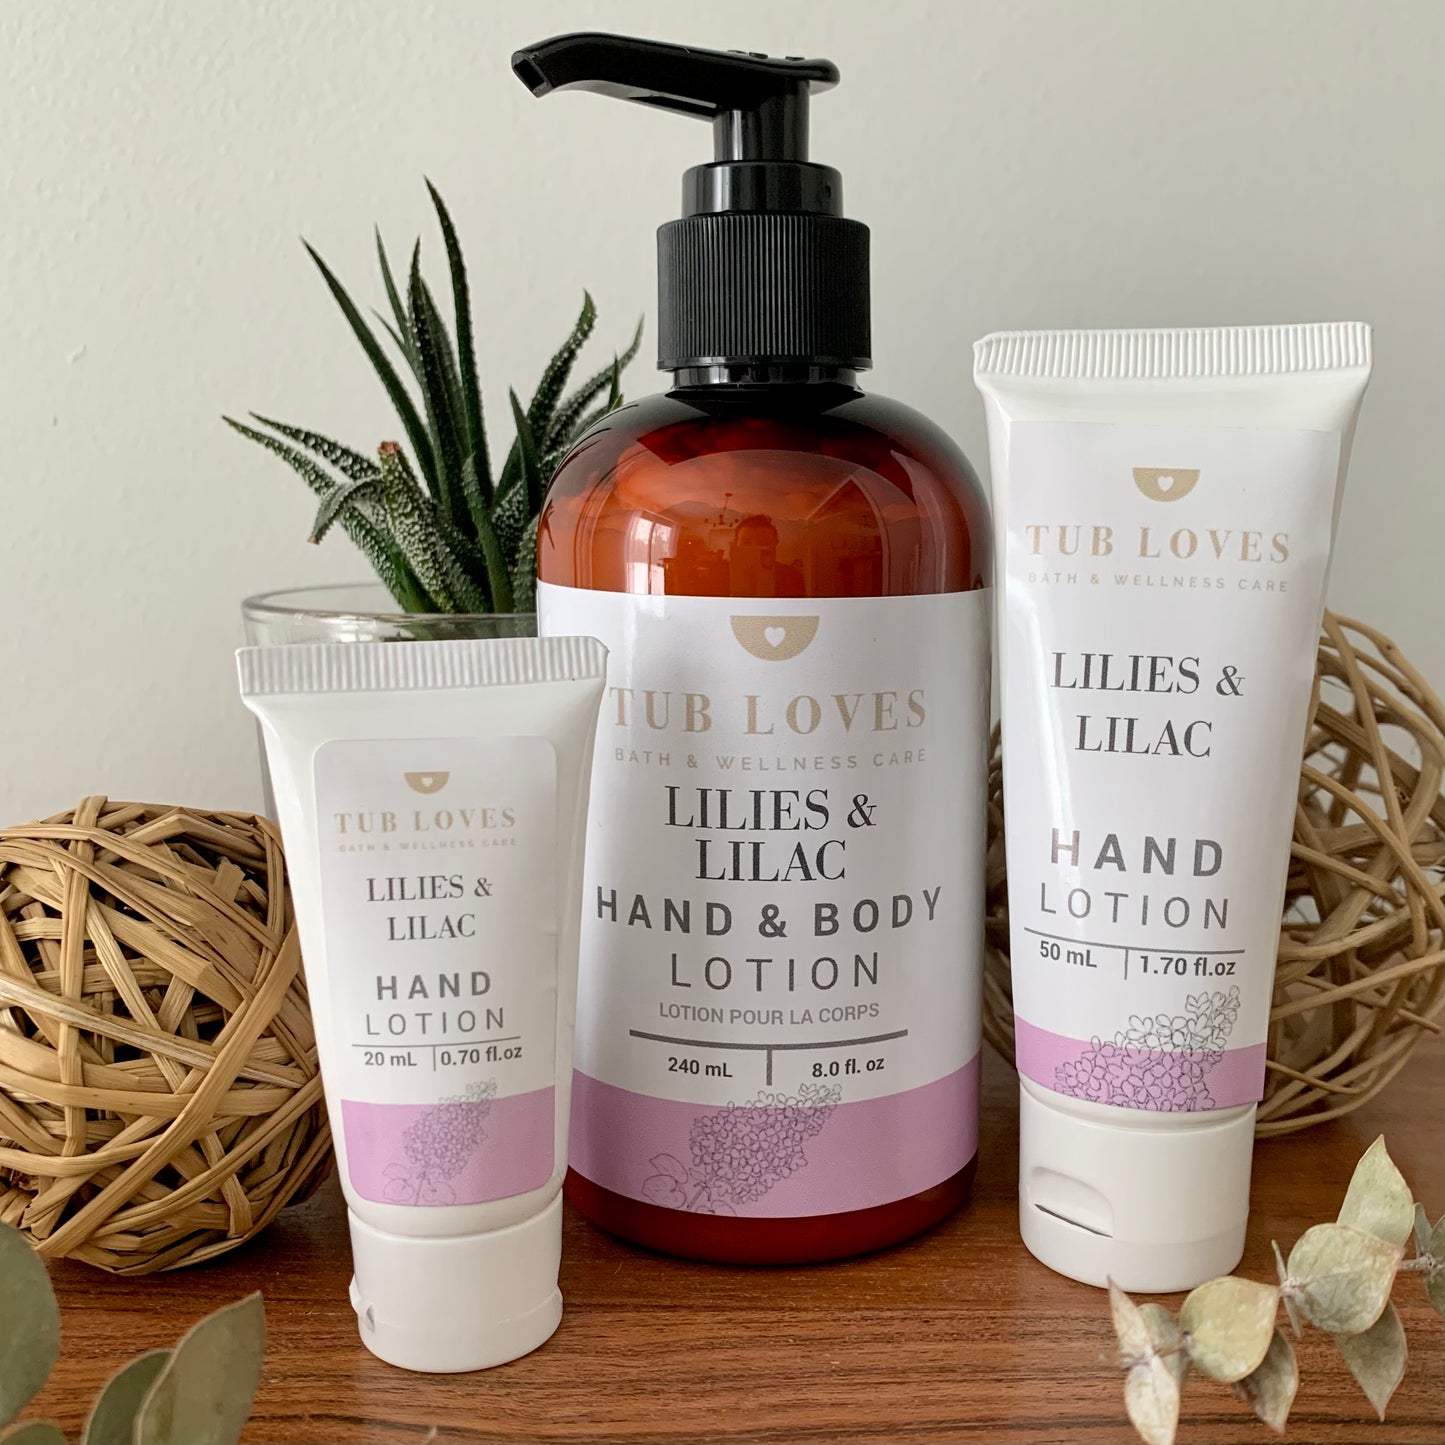 Lilies & Lilac - Hand & Body Lotion